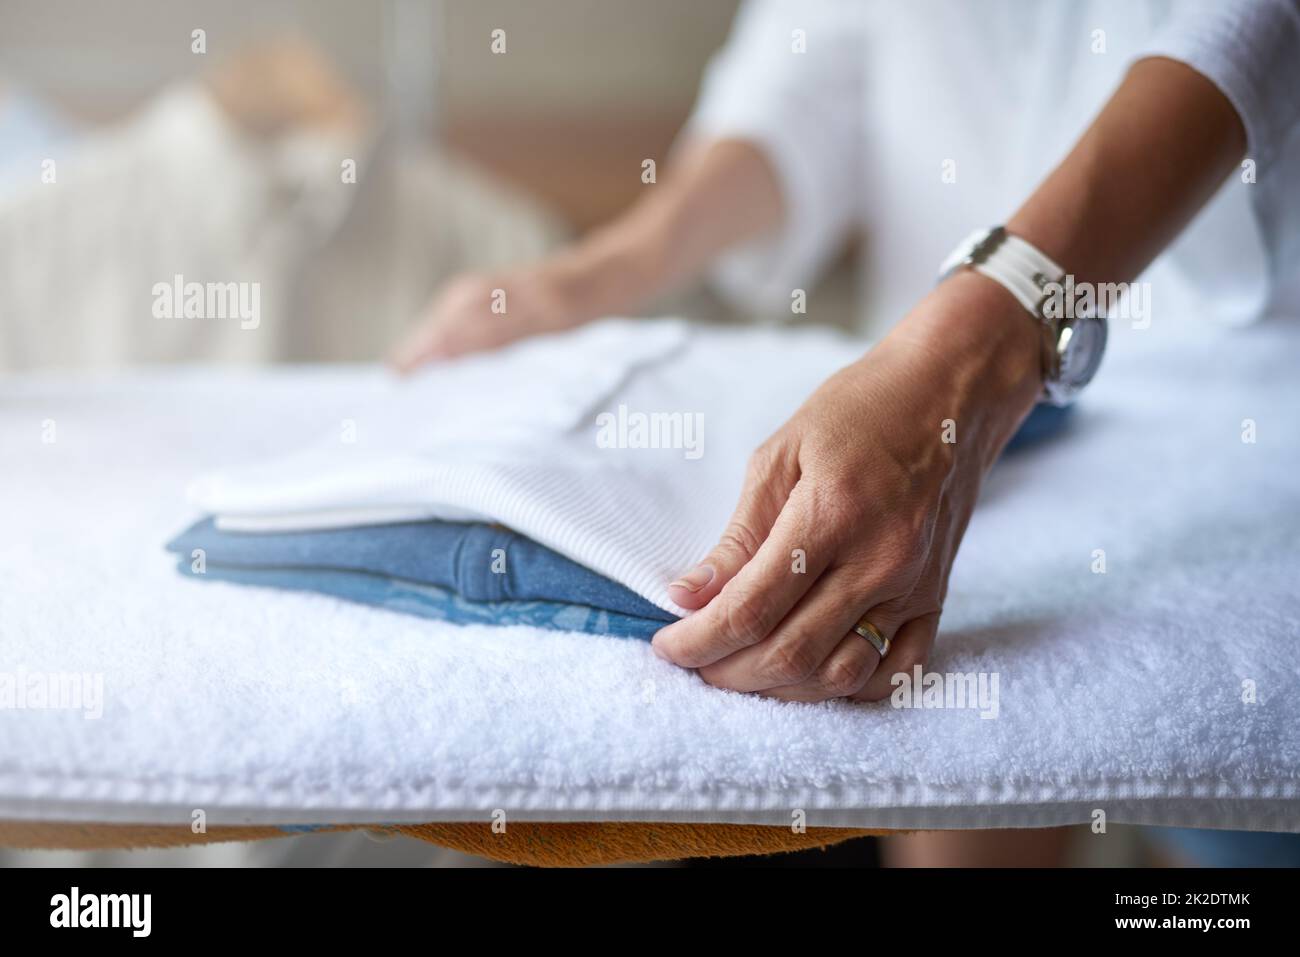 Keeping laundry neat. Closeup of a woman folding some clothes that have been ironed. Stock Photo